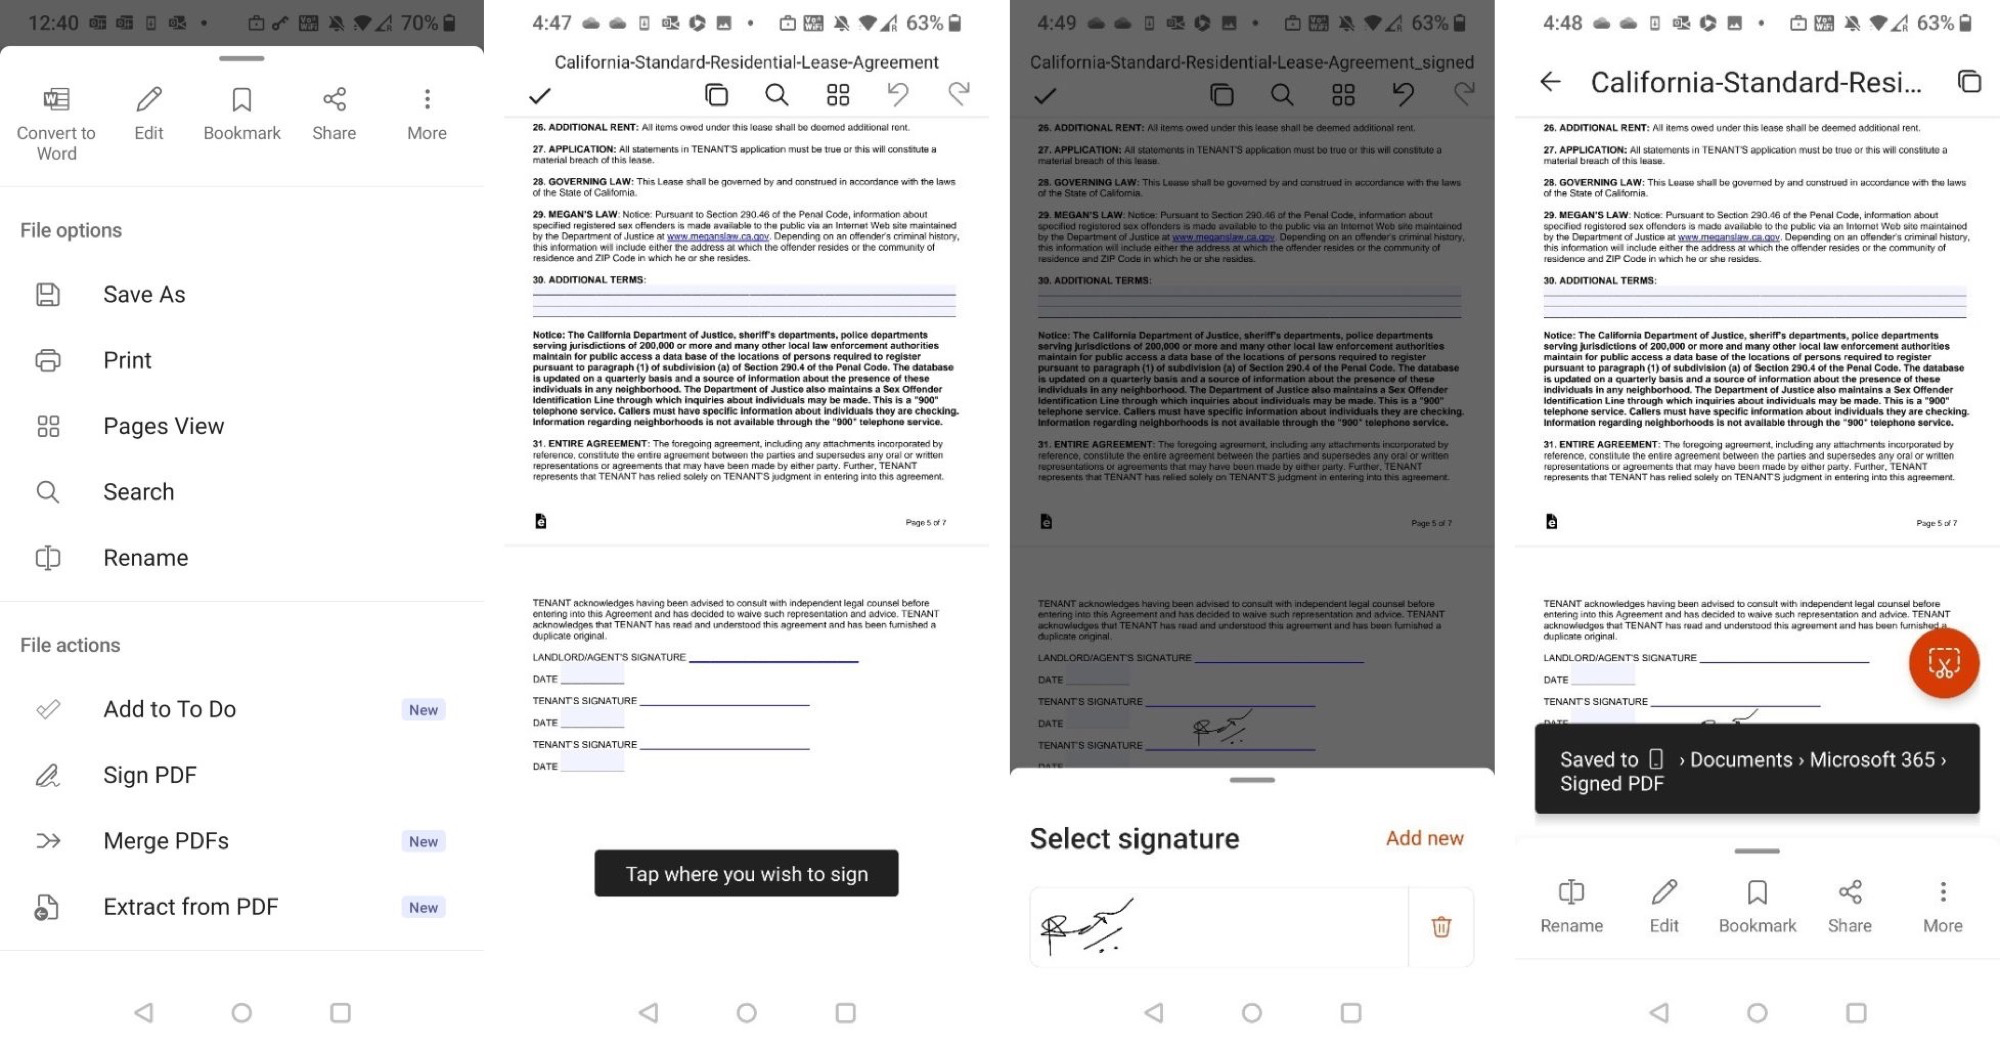 Screenshots of signing a PDF in the Microsoft 365 app